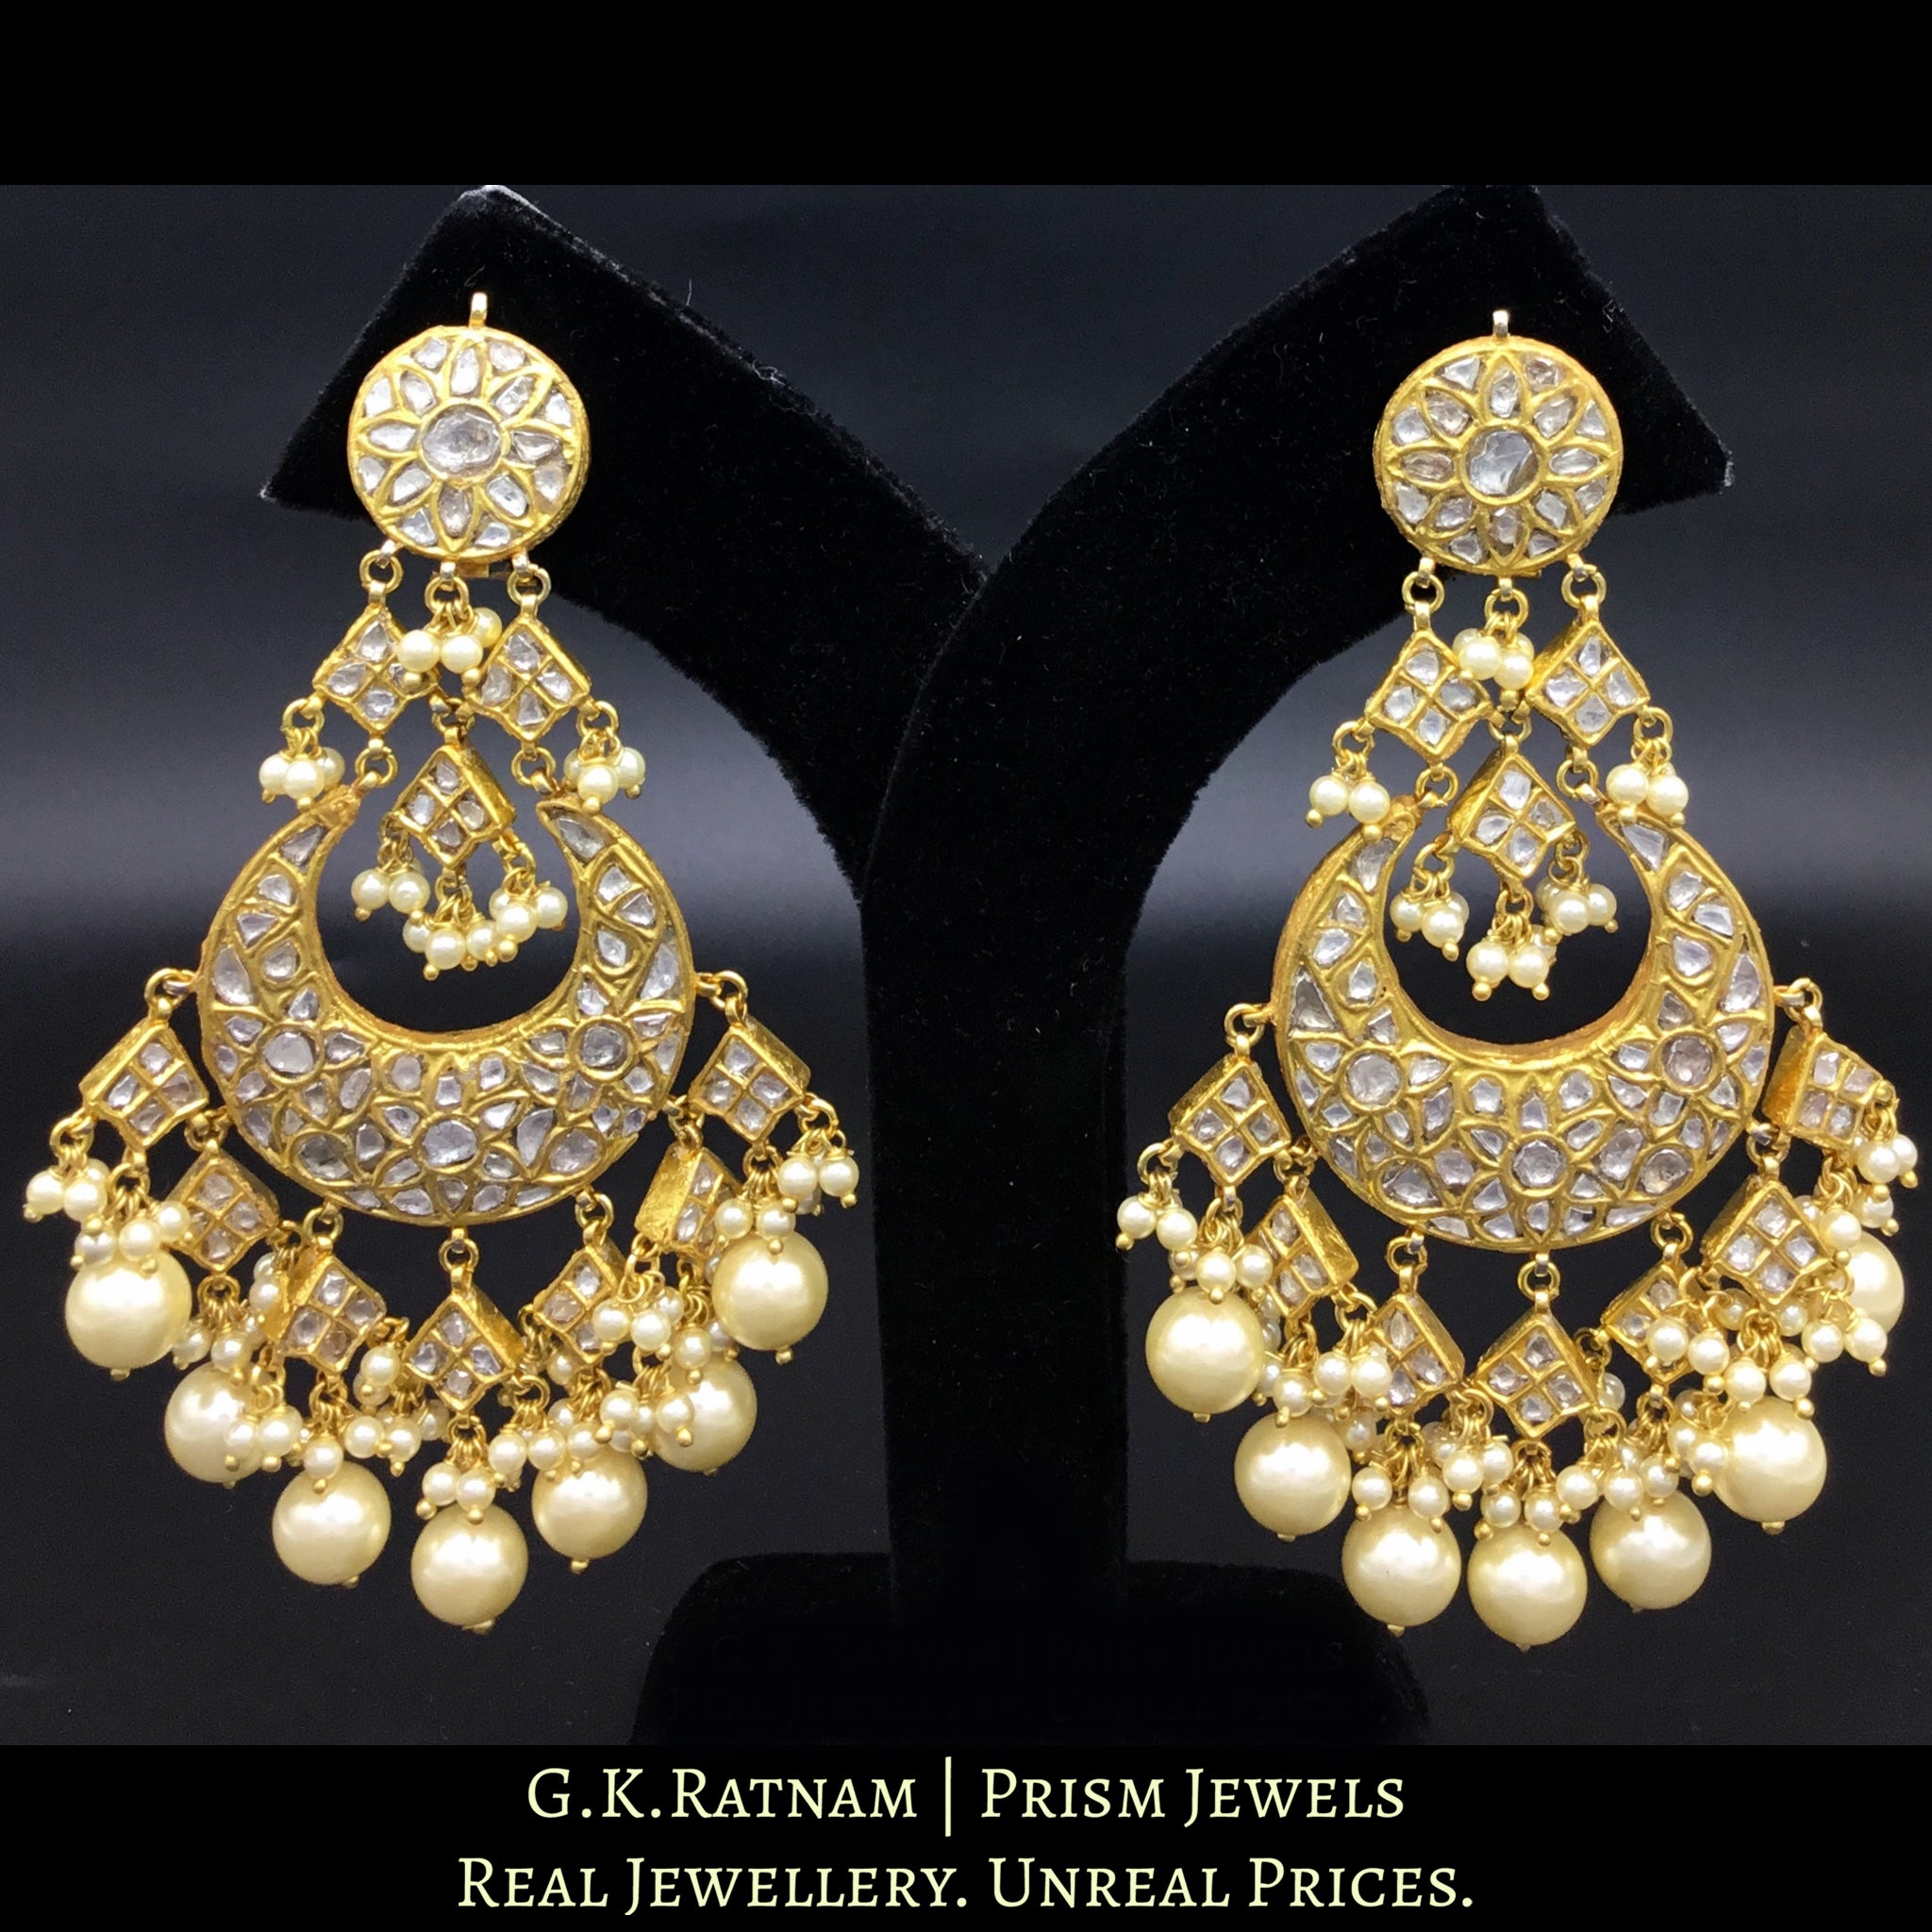 23k Gold and Diamond Polki Chand Bali Earring Pair with triple-coated shell pearls and cascading polkis